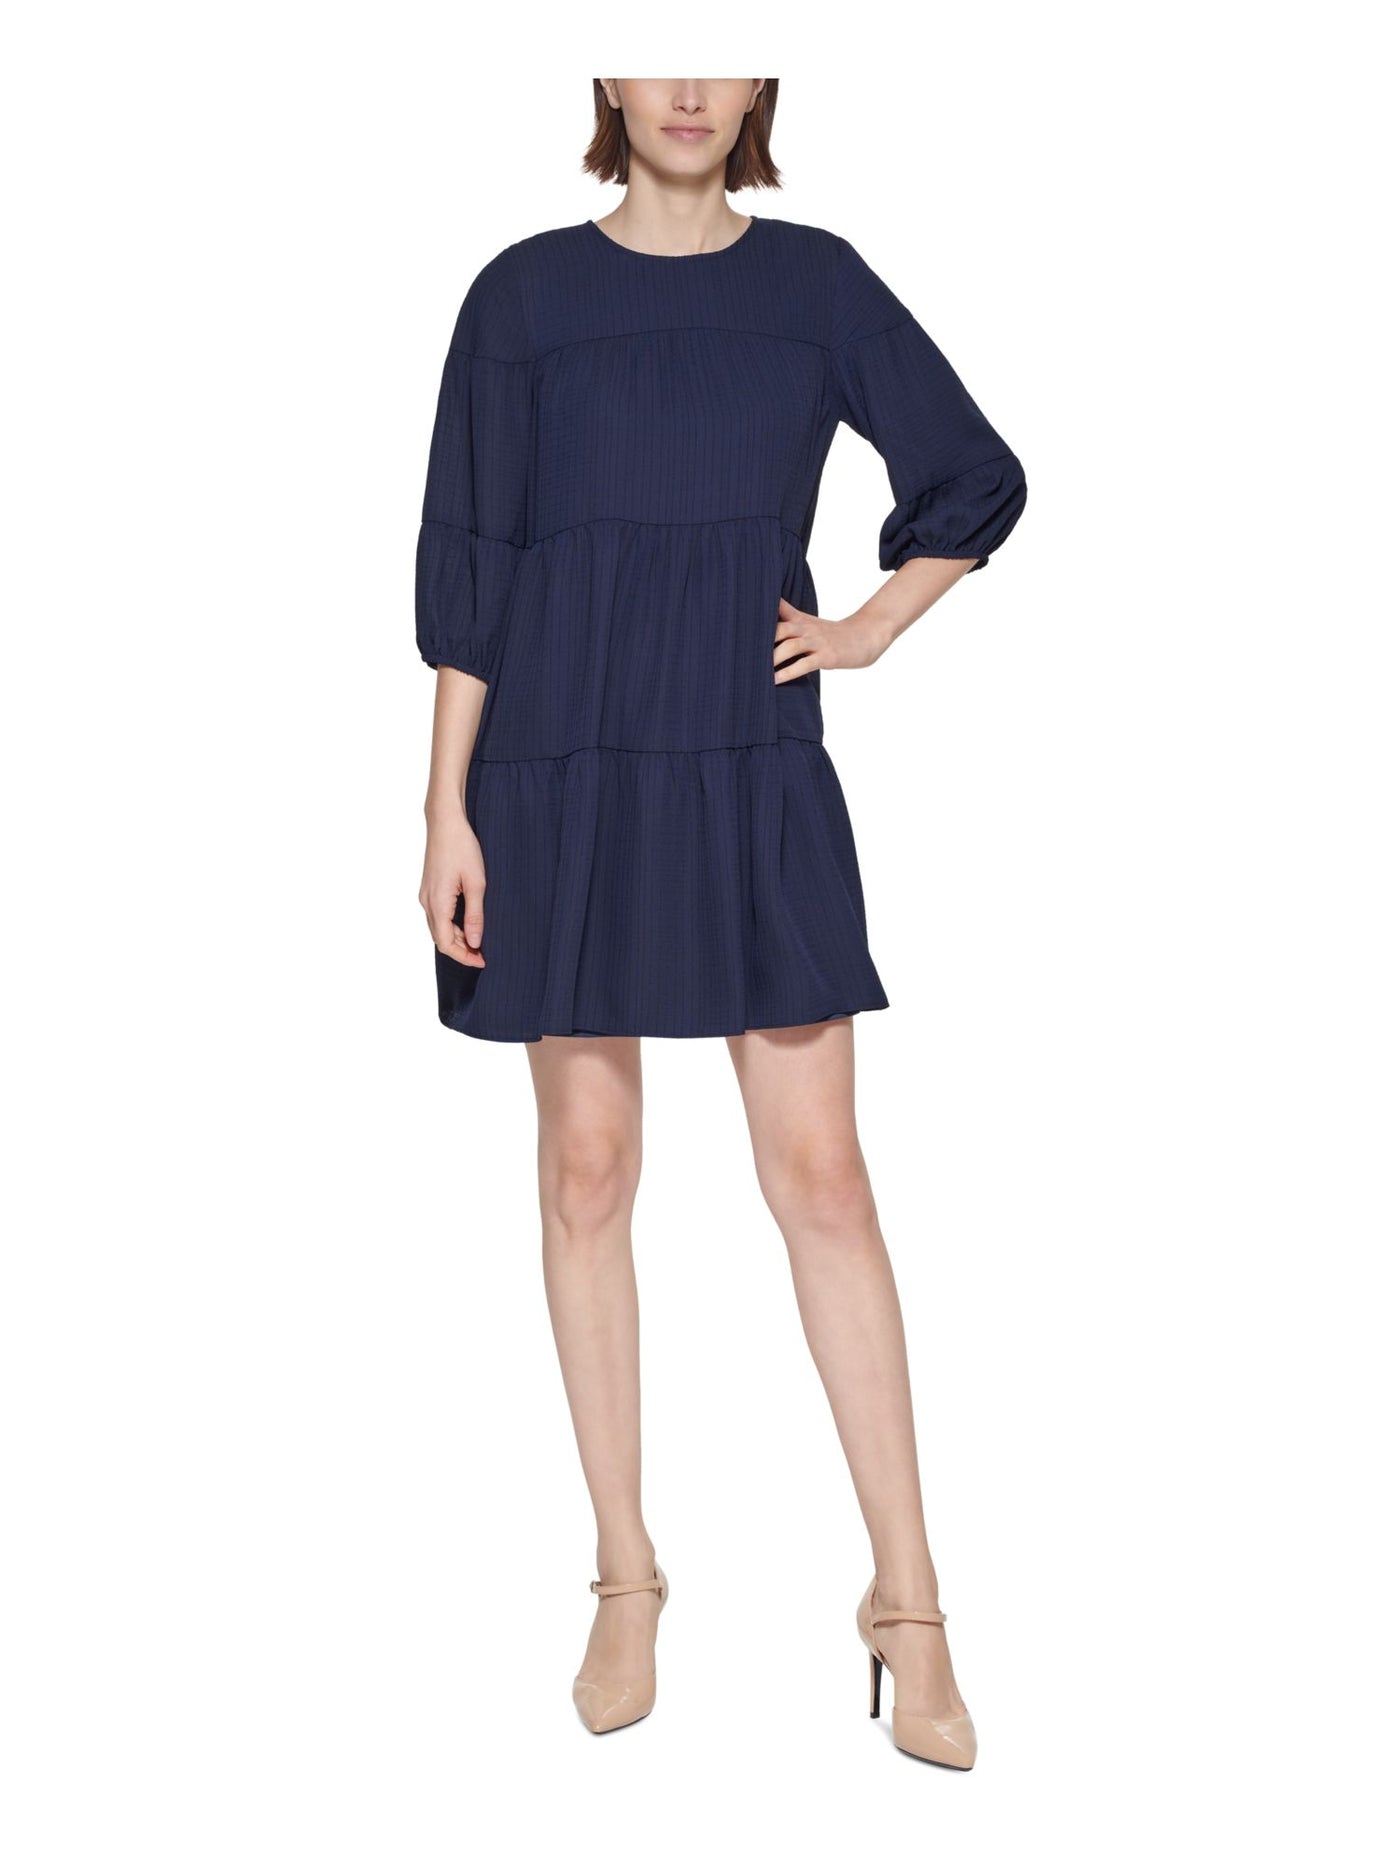 CALVIN KLEIN Womens Navy Textured Keyhole Back Tiered Lined 3/4 Sleeve Round Neck Short Shift Dress Petites 0P